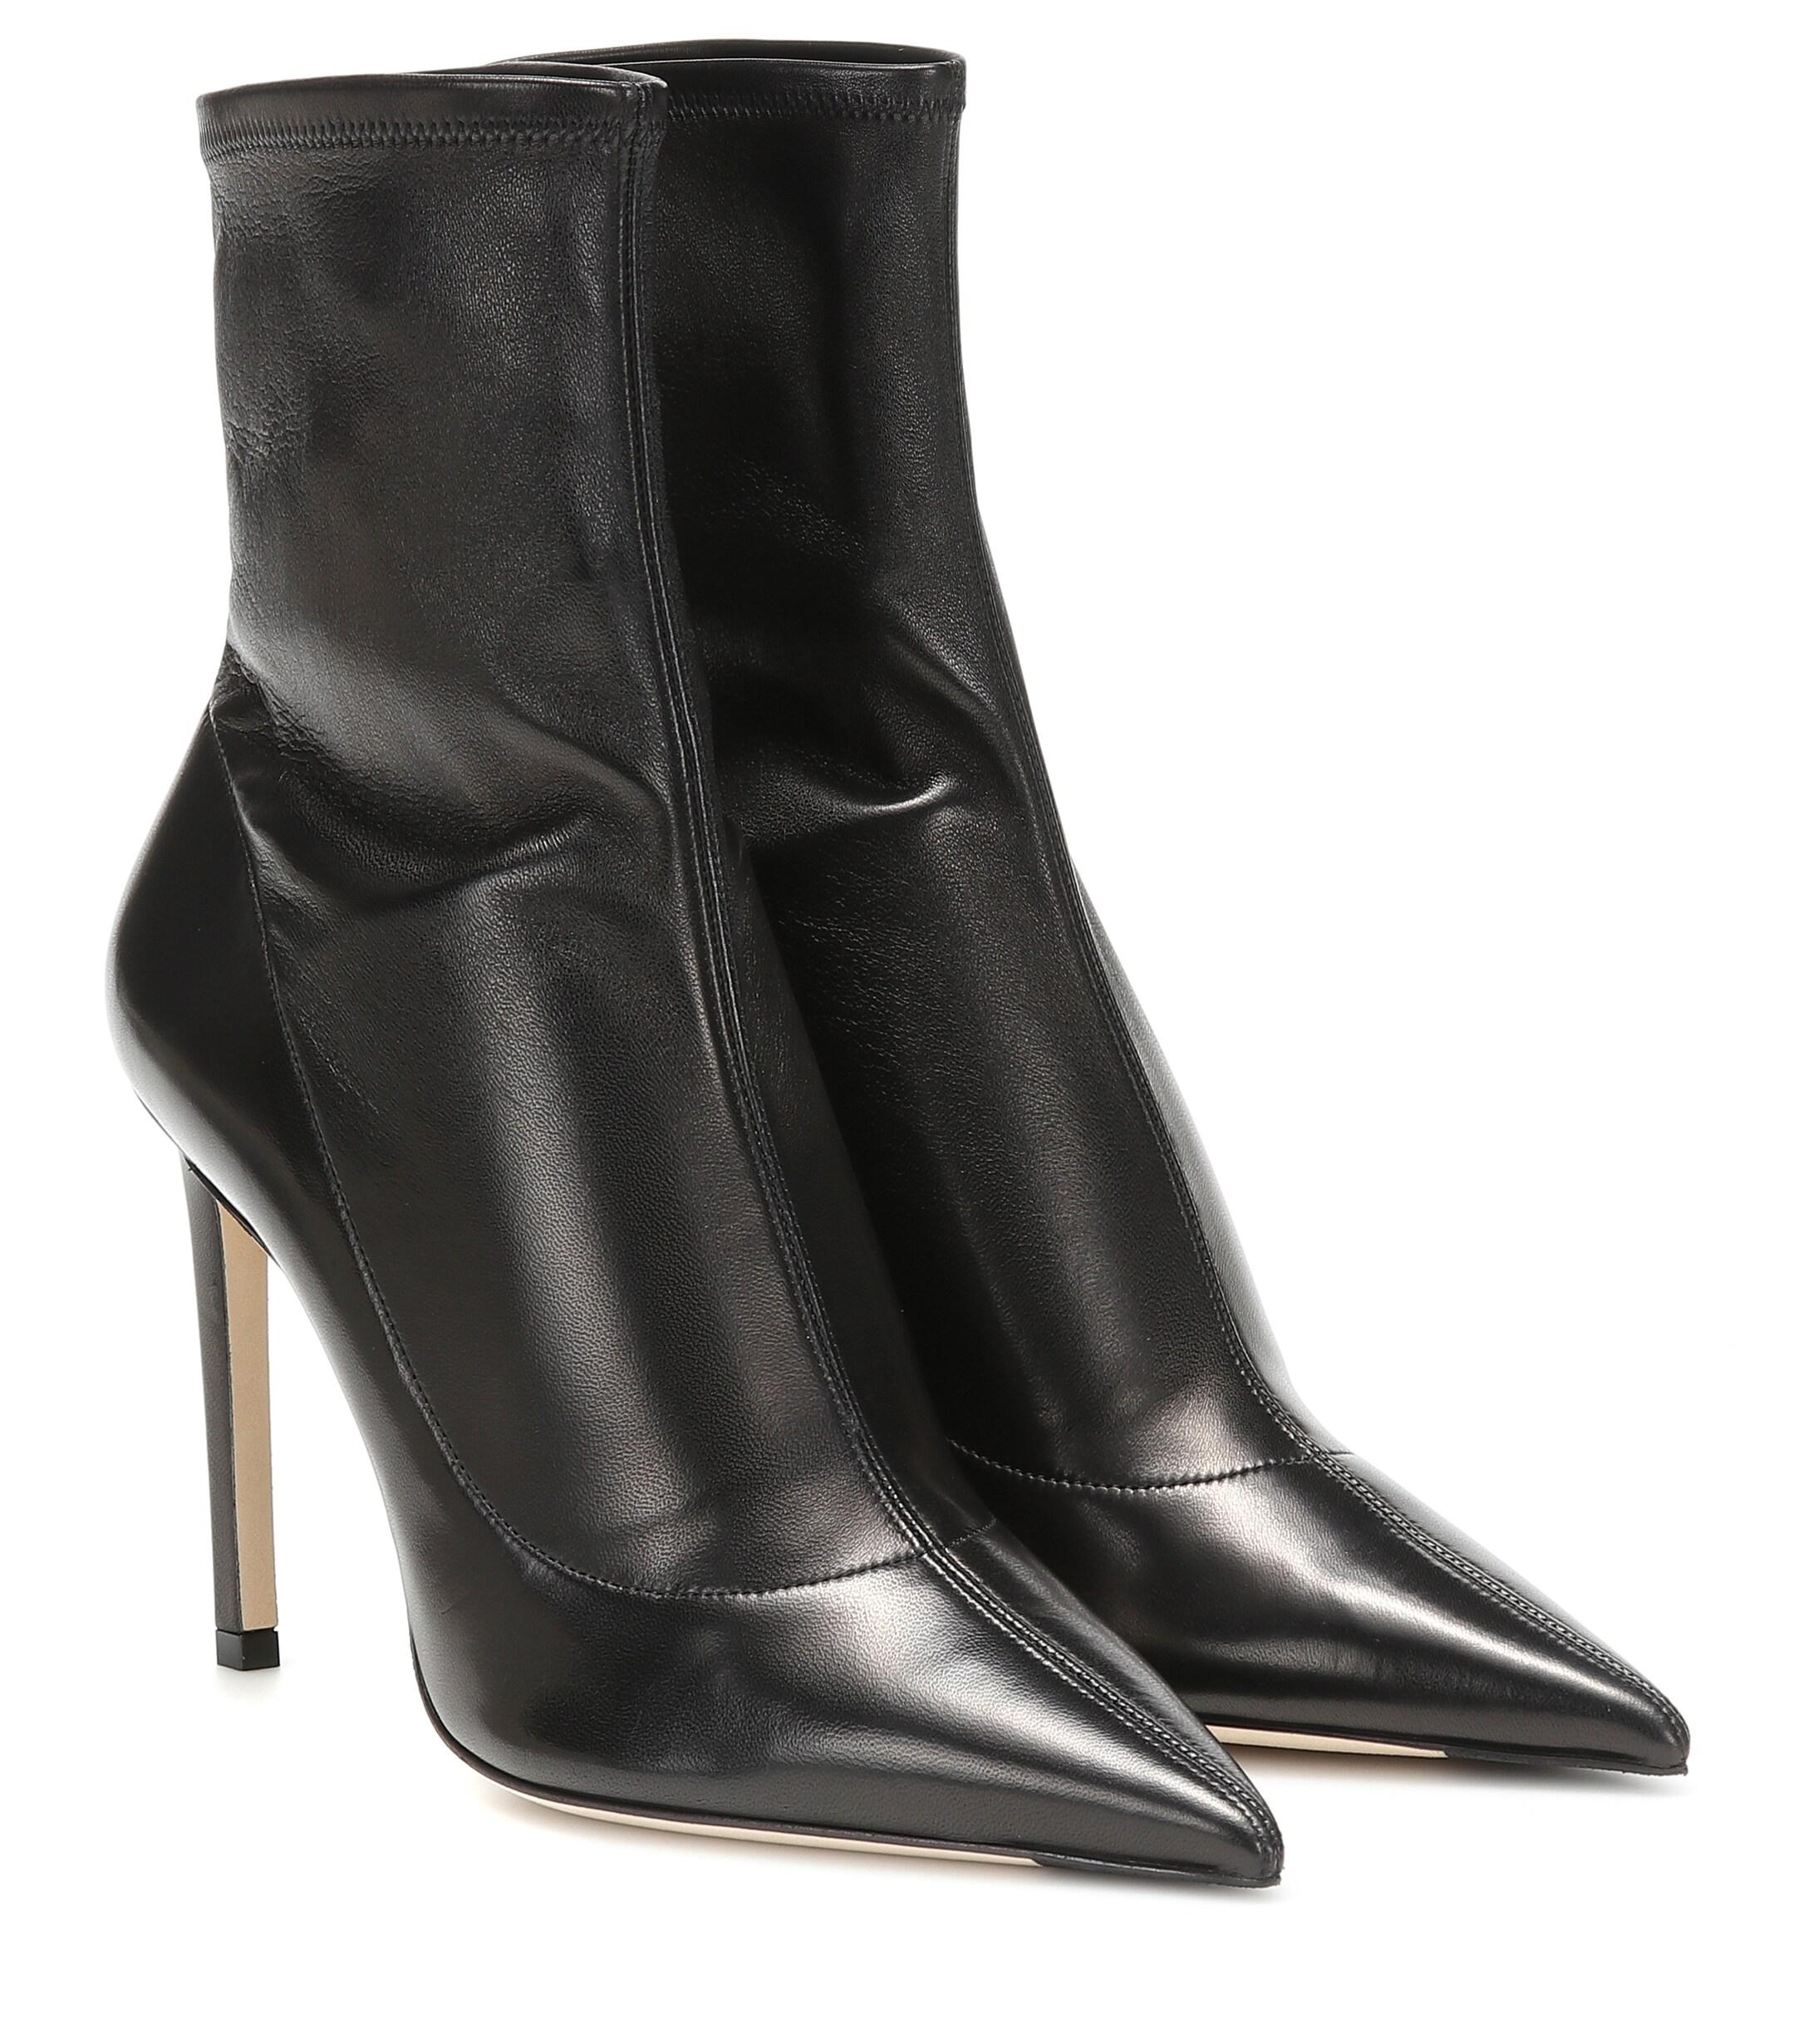 Jimmy Choo Brin 100 Leather Ankle Boots in Black - Save 18% - Lyst